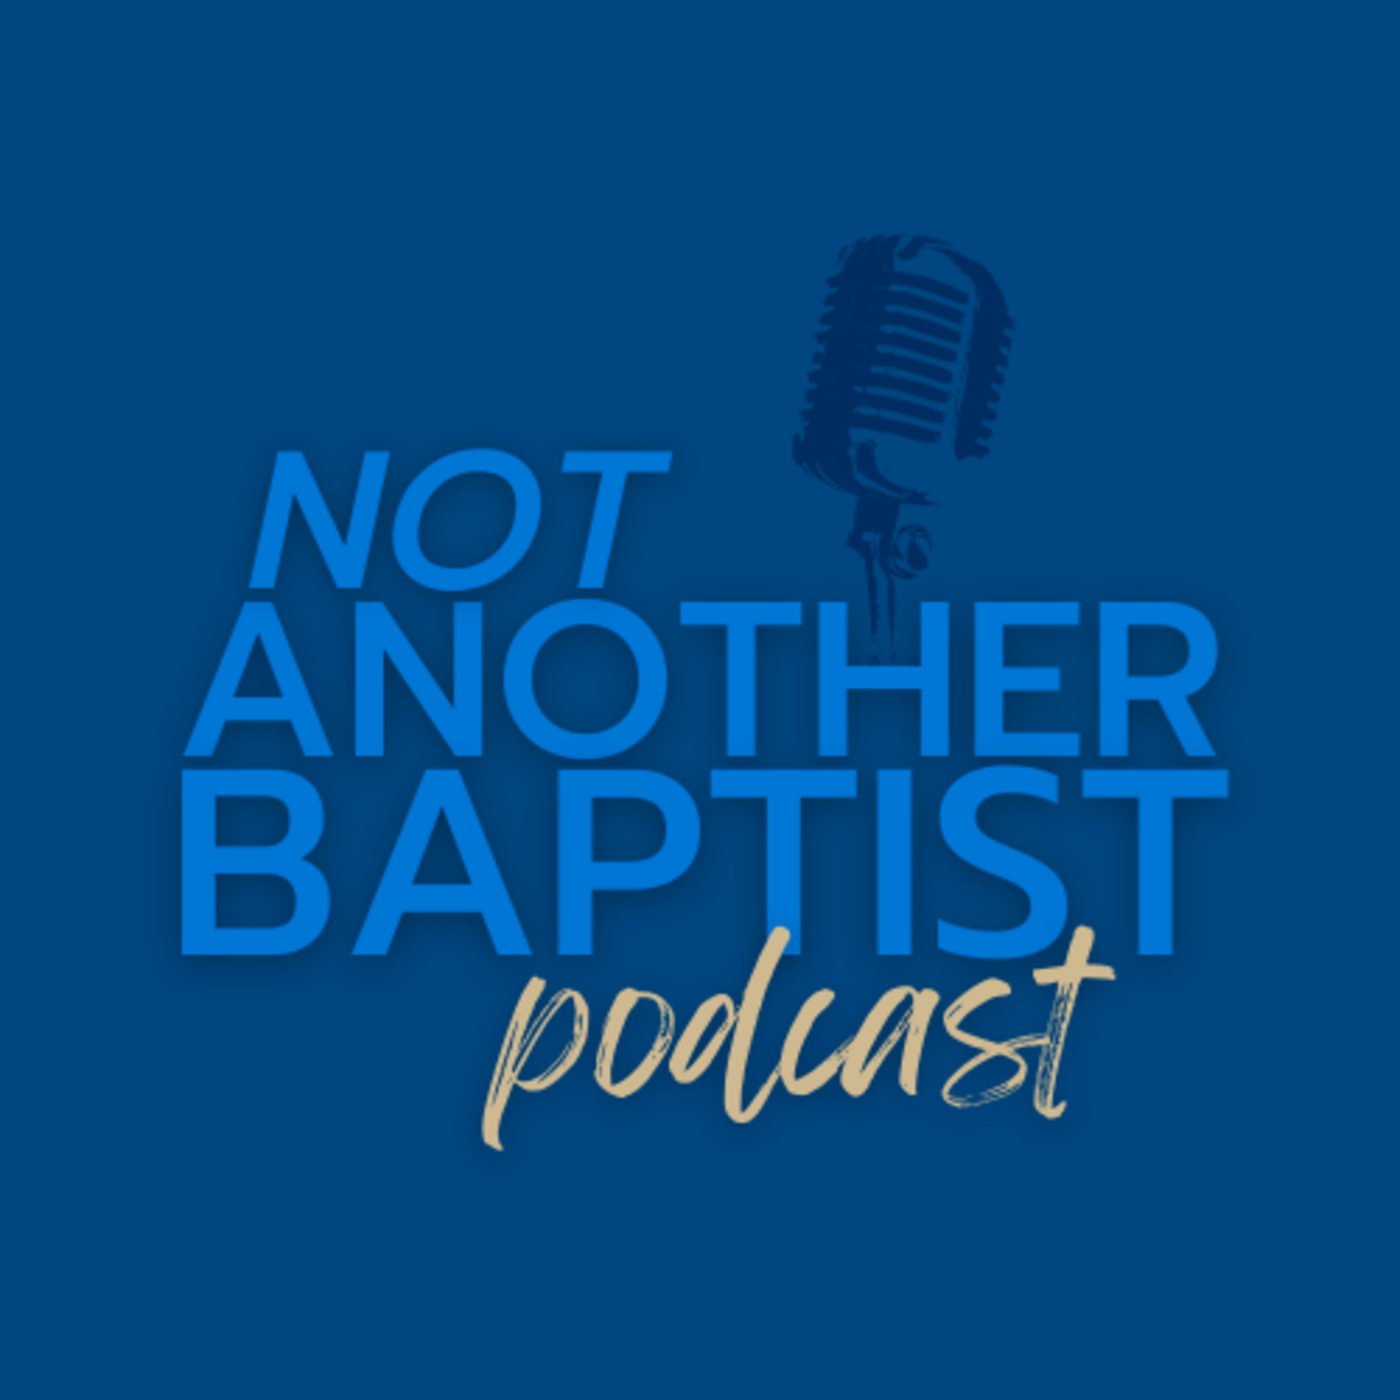 Episode 292: Episode 239: SWBTS at #SBC22 with Greenway, Upton, and Schroeder